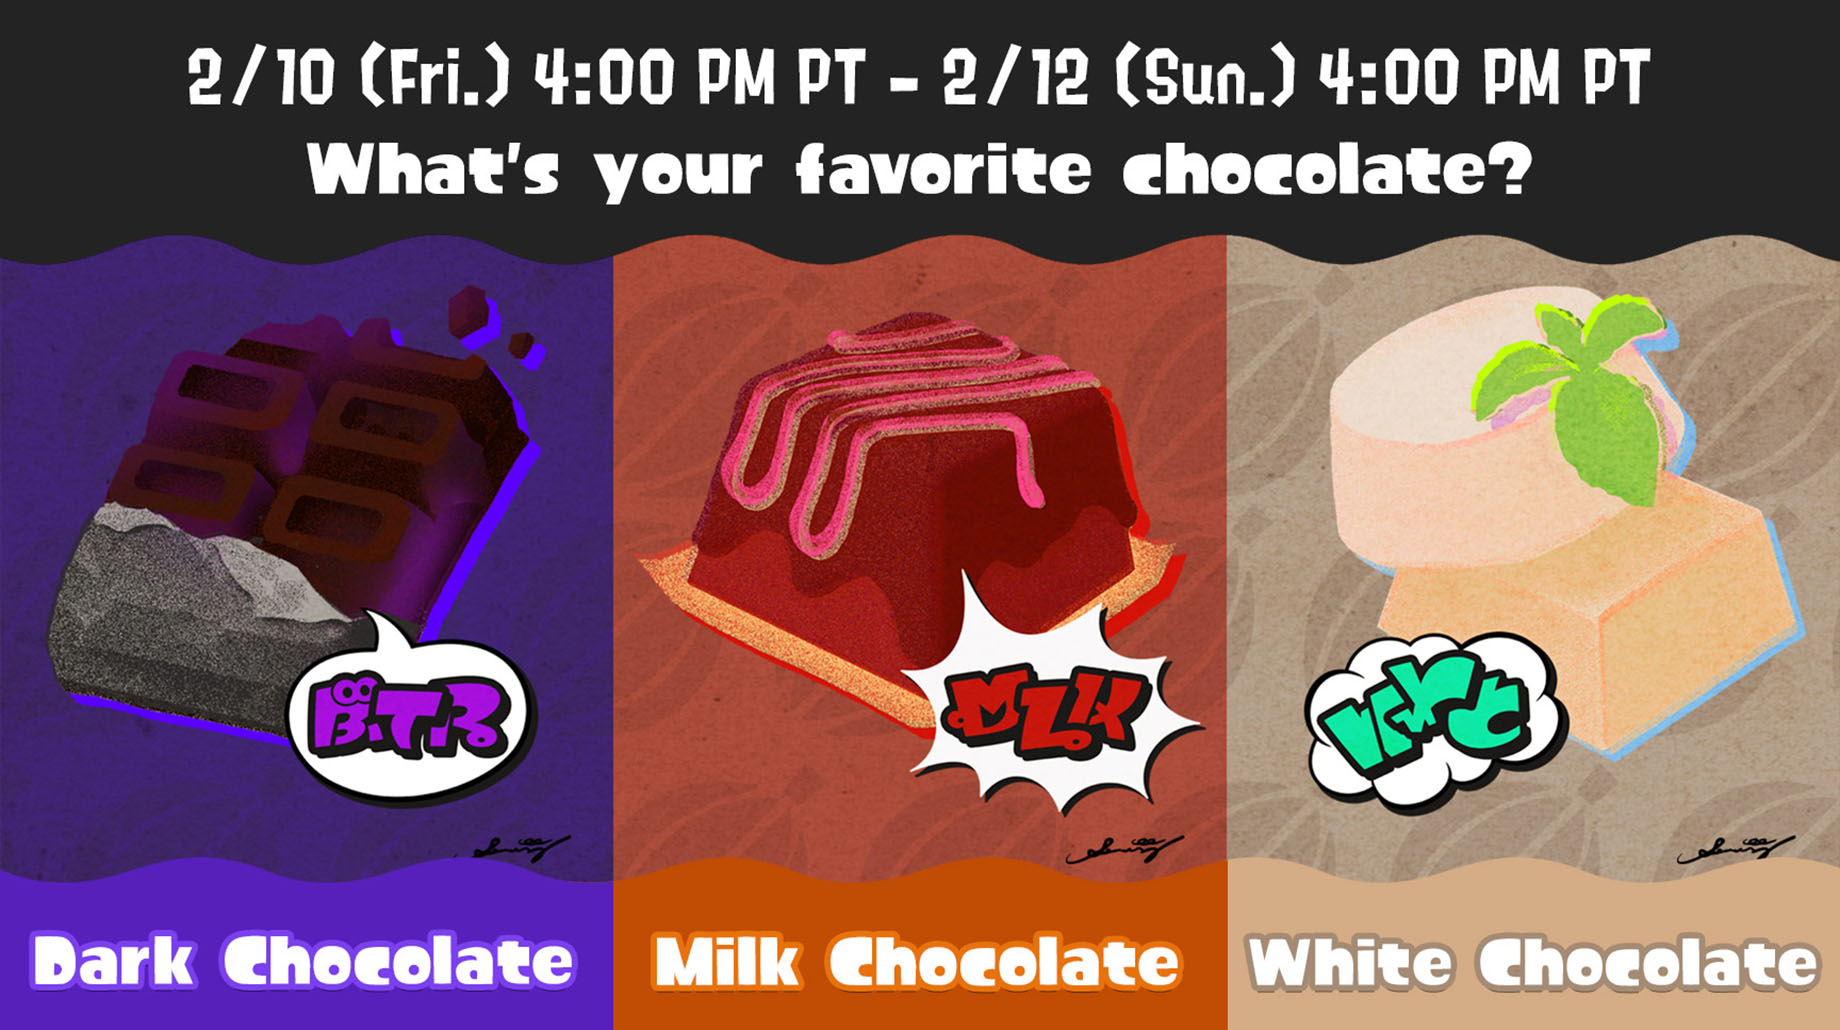 Splatfest signboard: What's your favorite chocolate? Dark chocolate, Milk chocolate, or White chocolate?